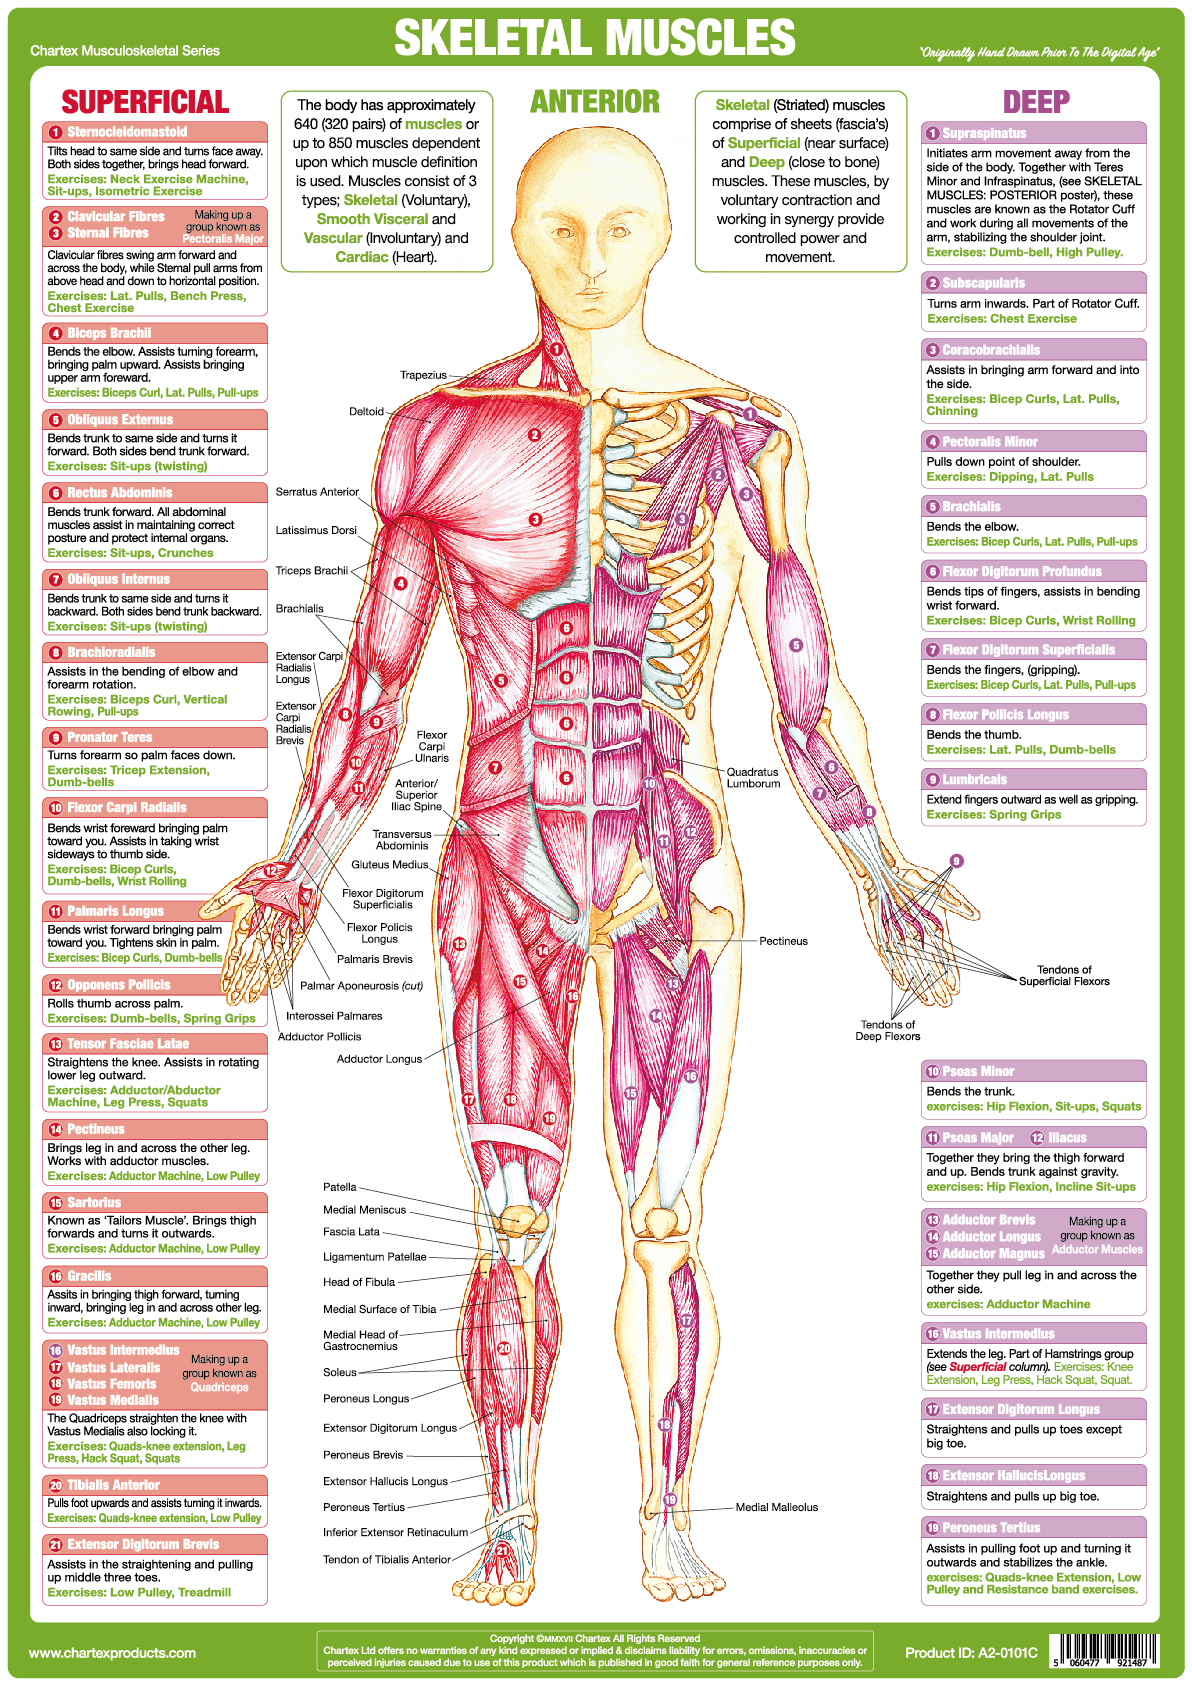 Skeletal Muscles - Anterior - A1 Chart